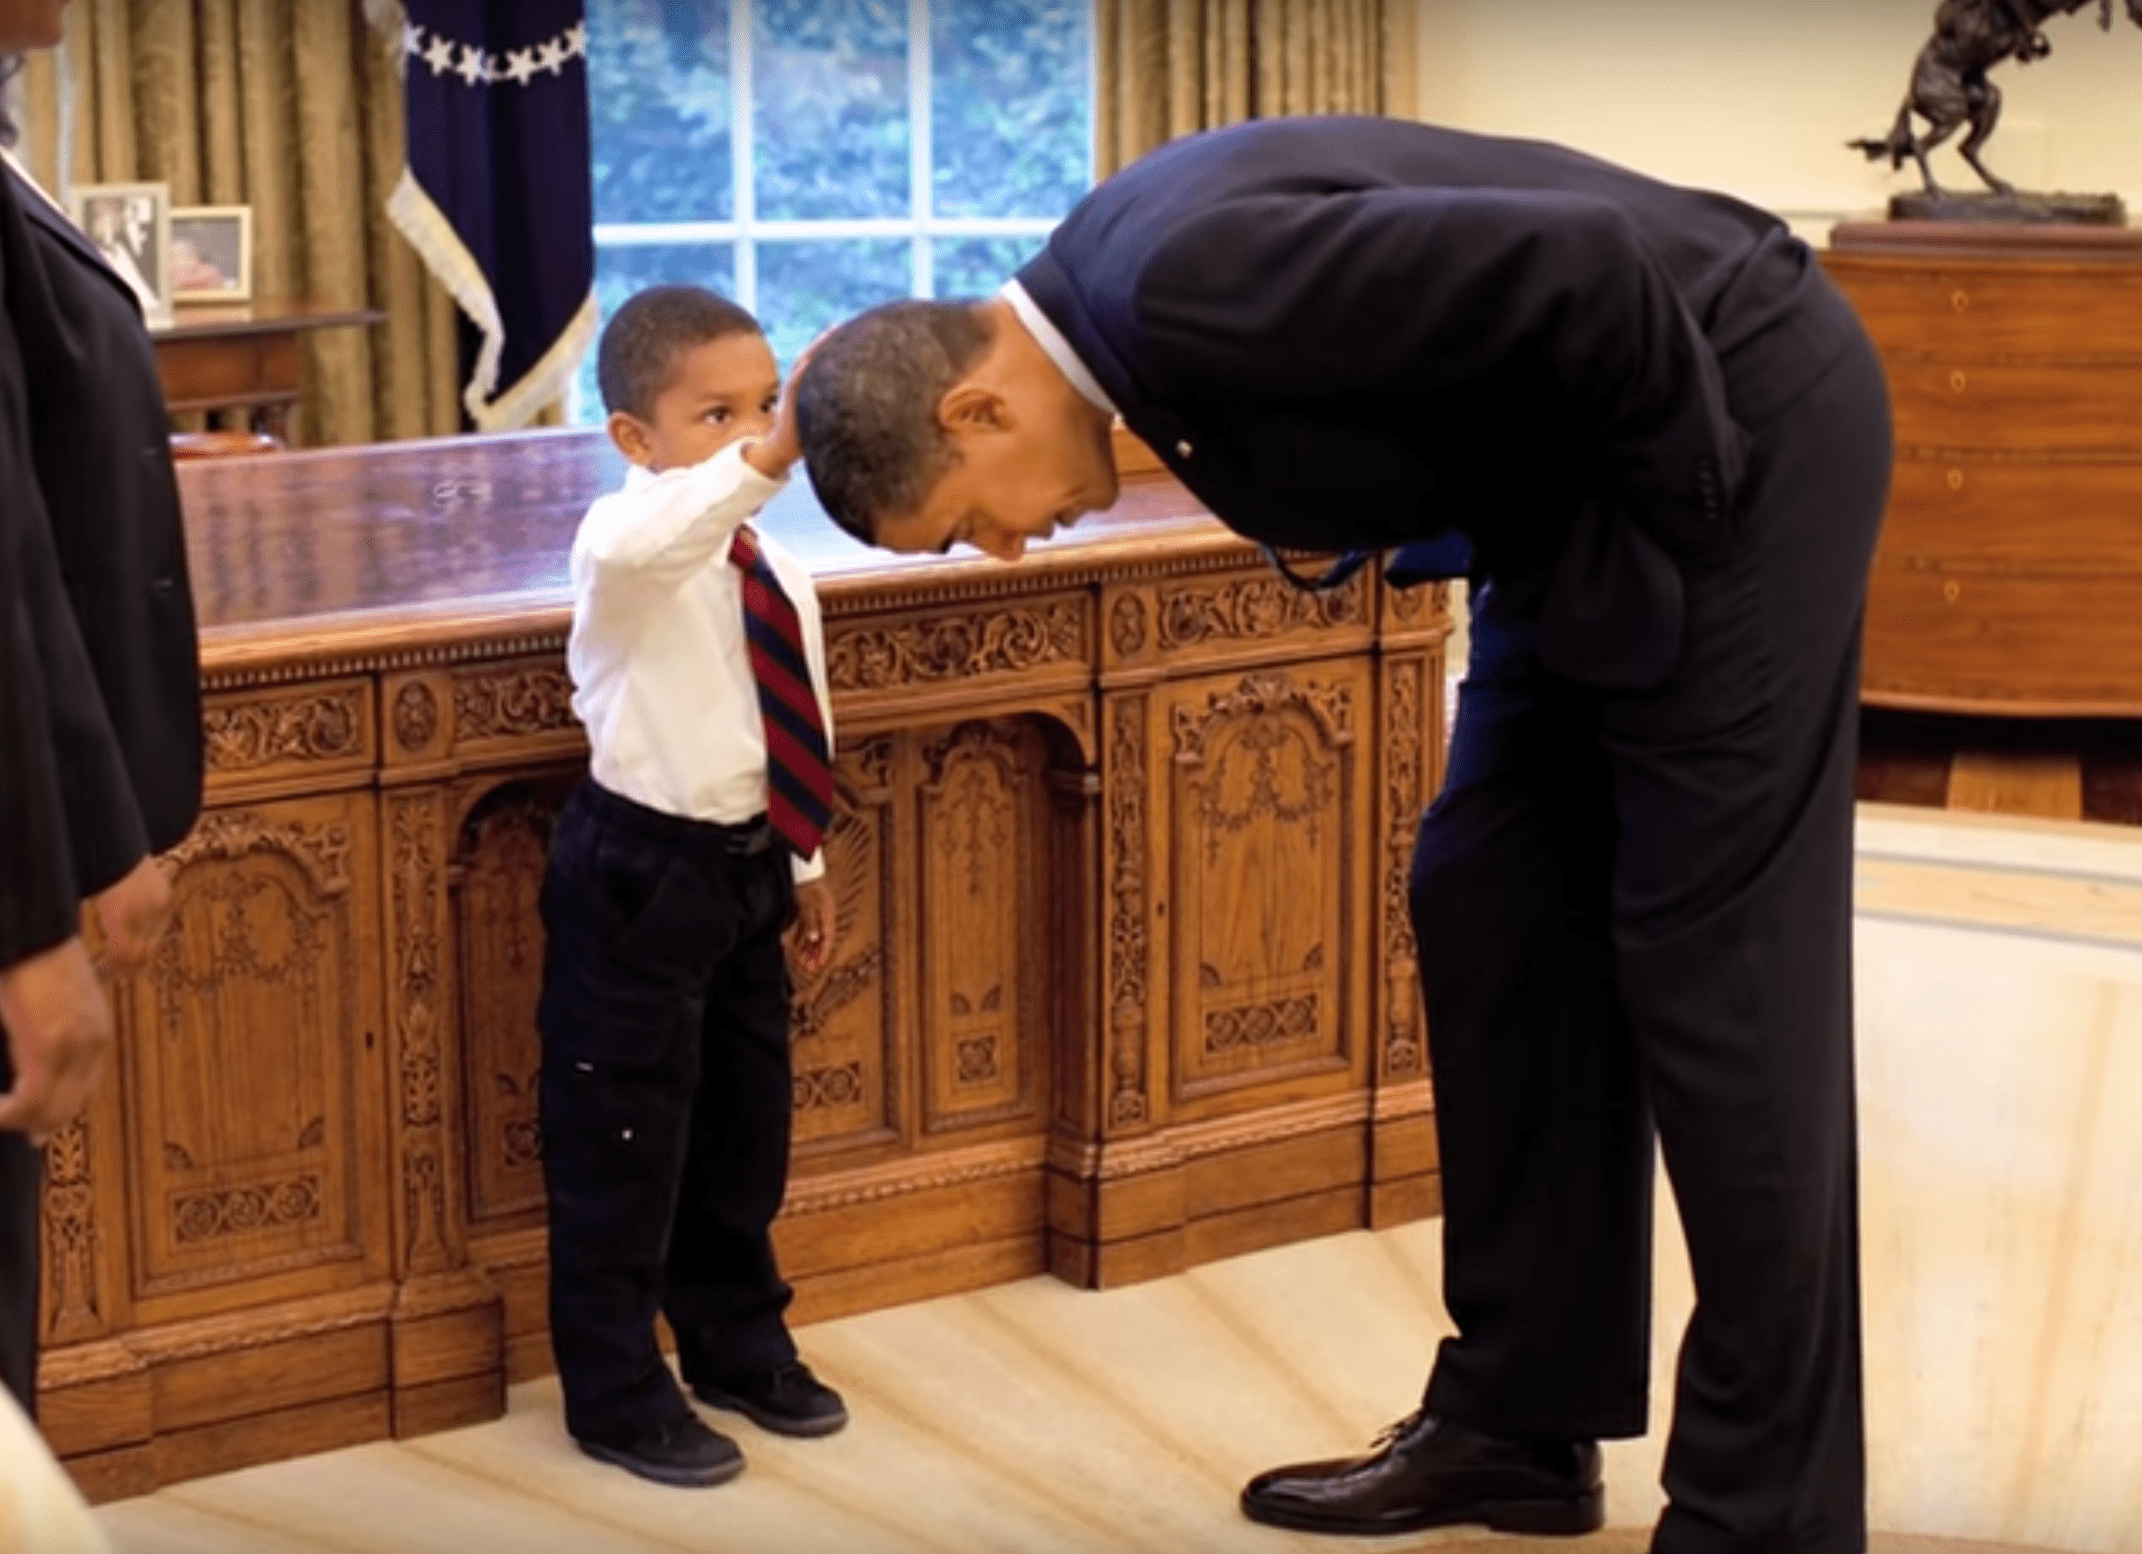 Obama bends down to let a young boy touch his head. | Source: YouTube/washingtonpost